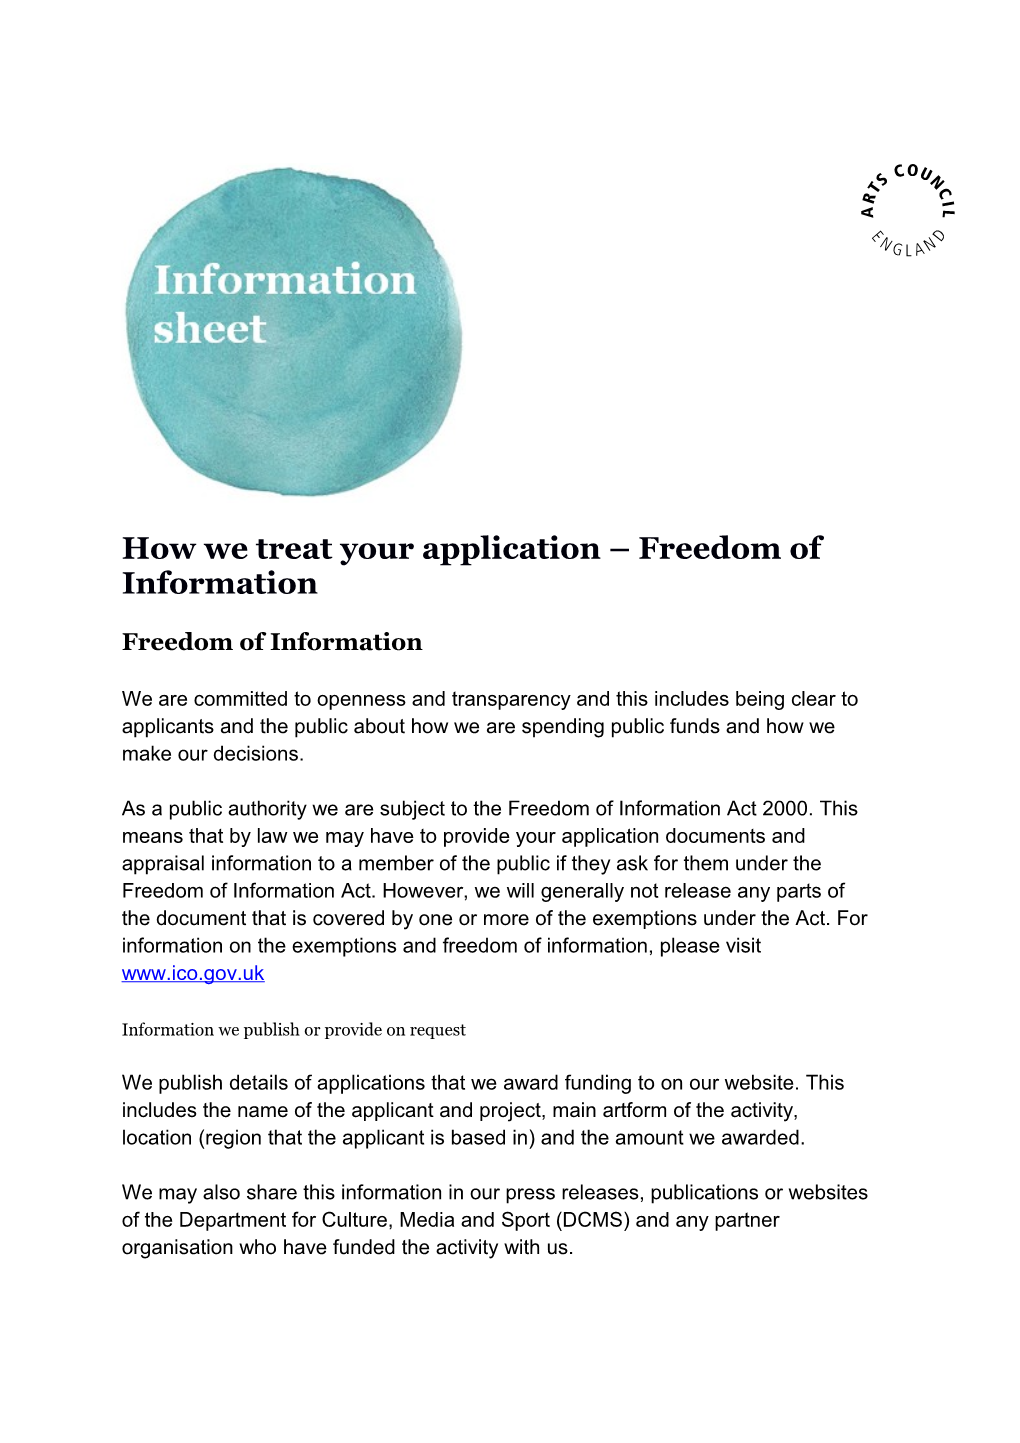 How We Treat Your Application Freedom of Information